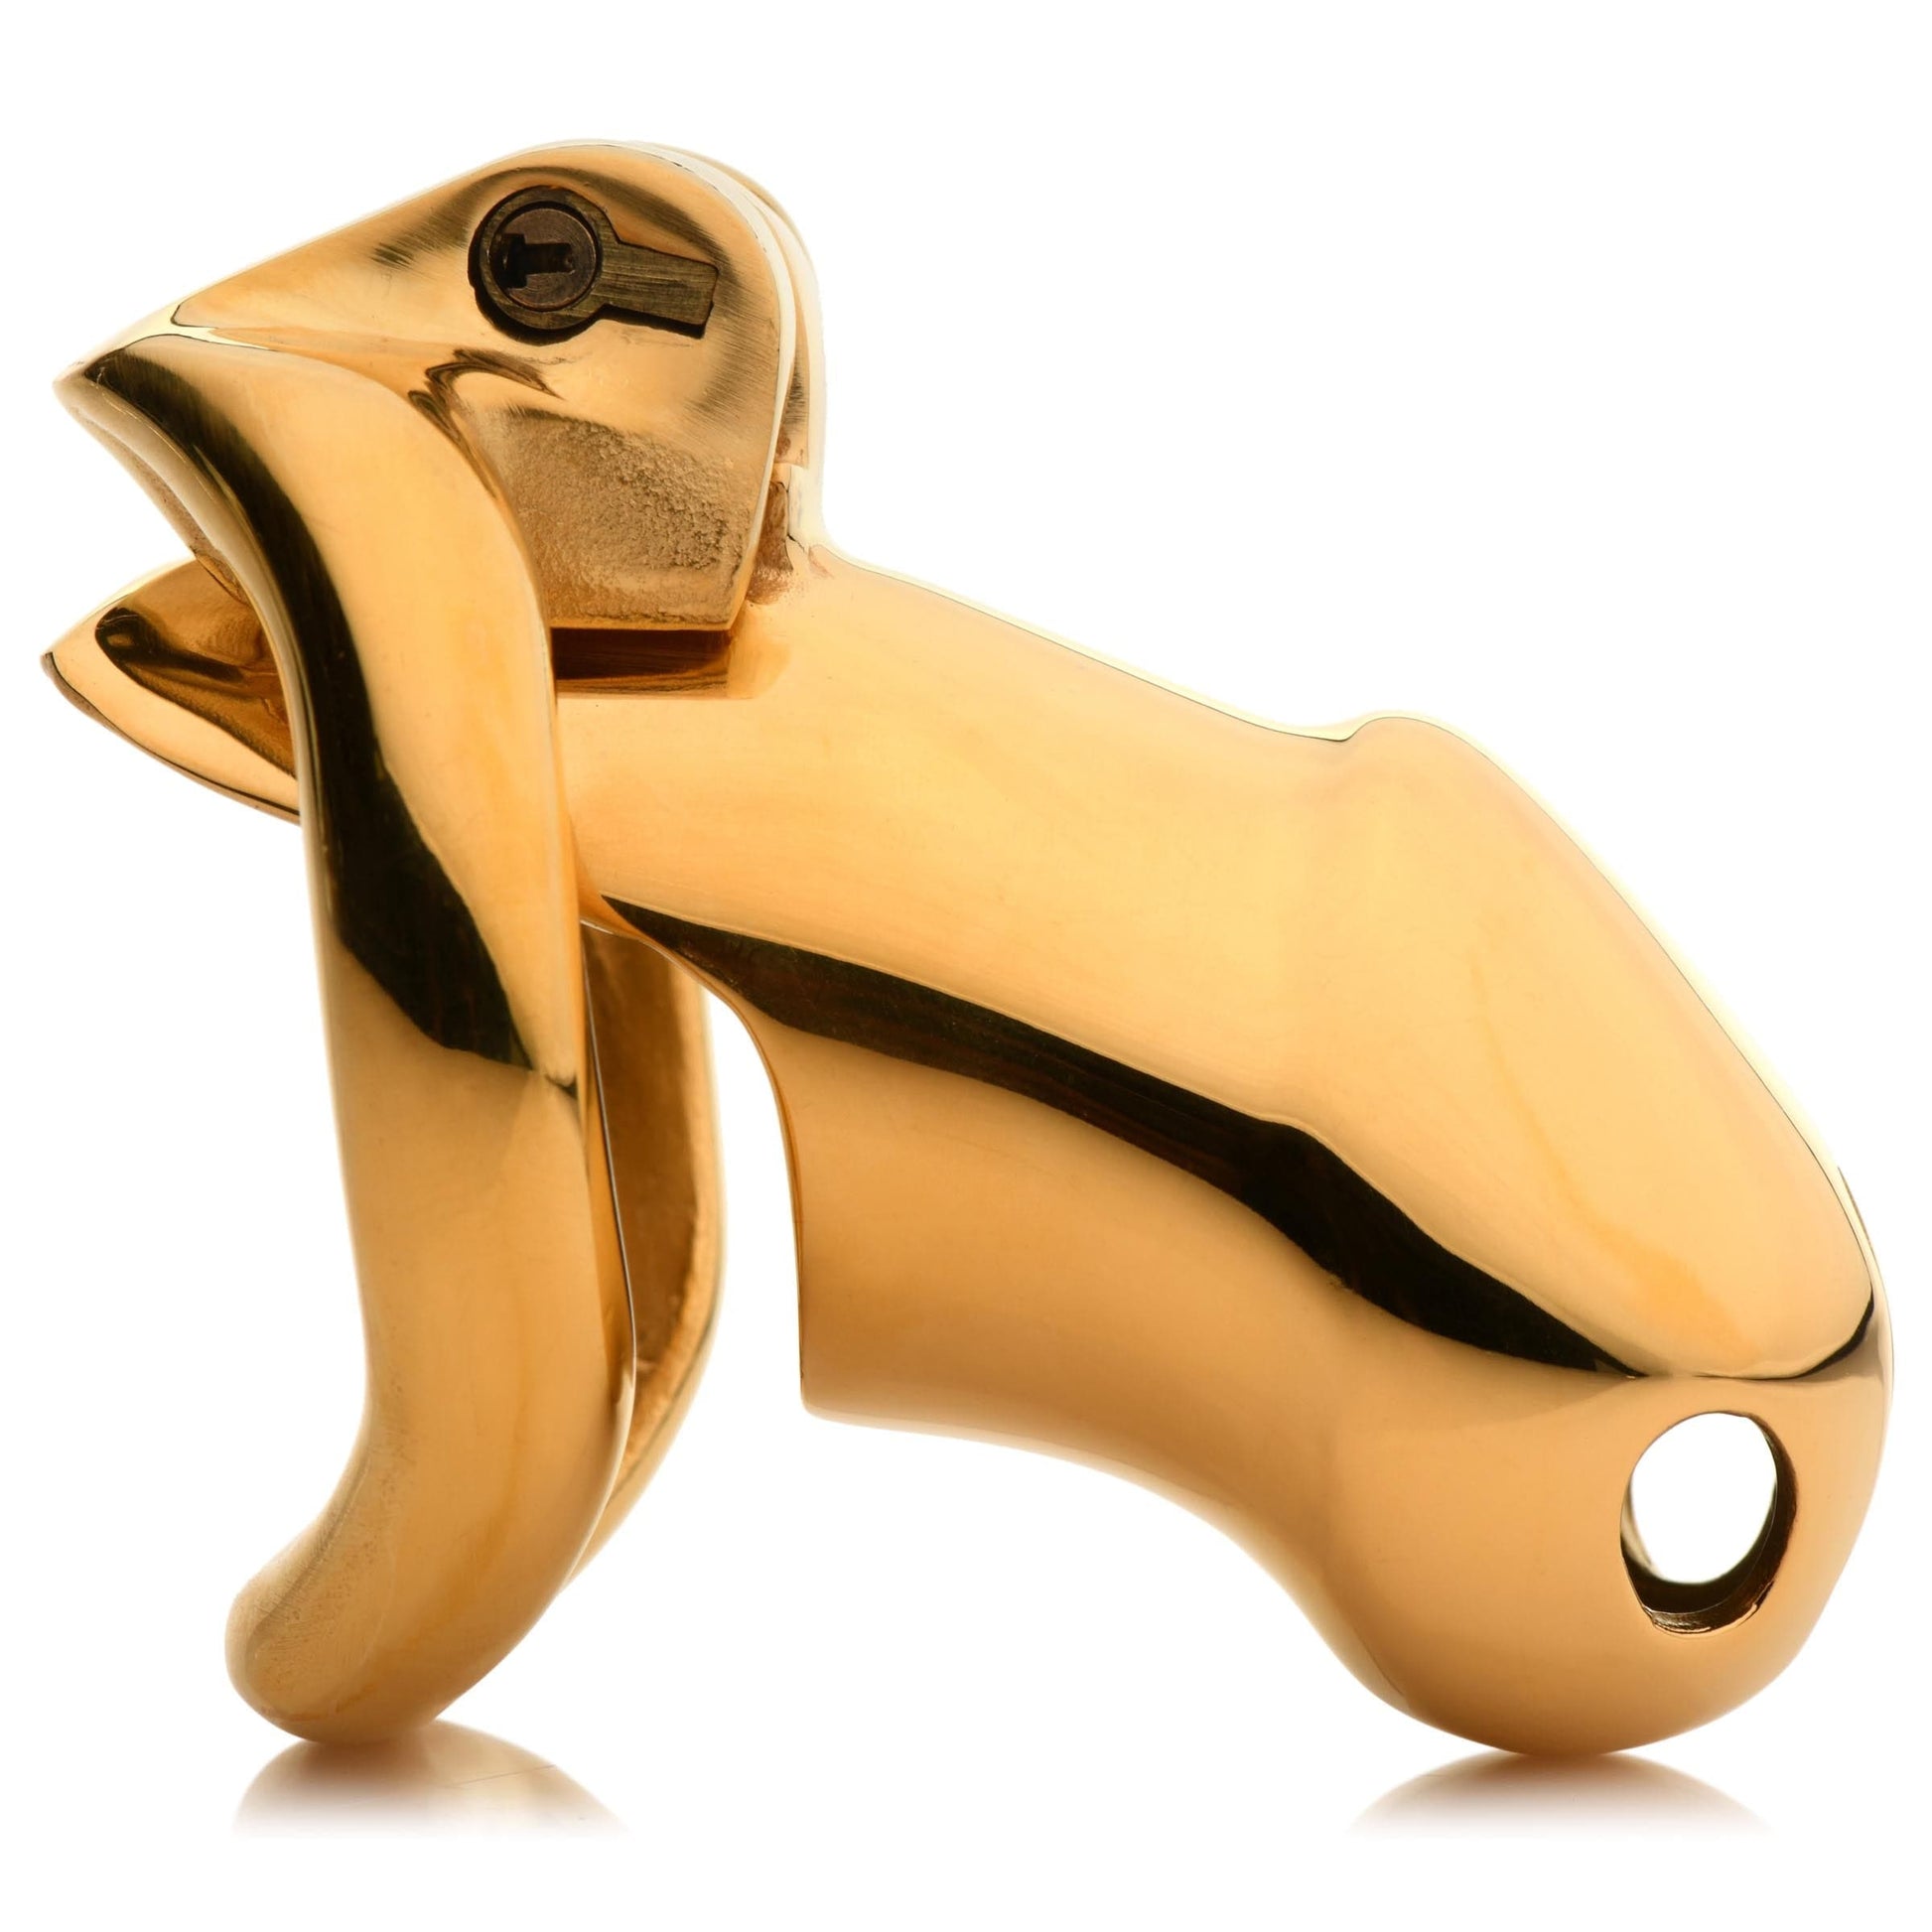 Master Series Cock Cage Midas 18k Gold-plated Locking Chastity Cage at the Haus of Shag